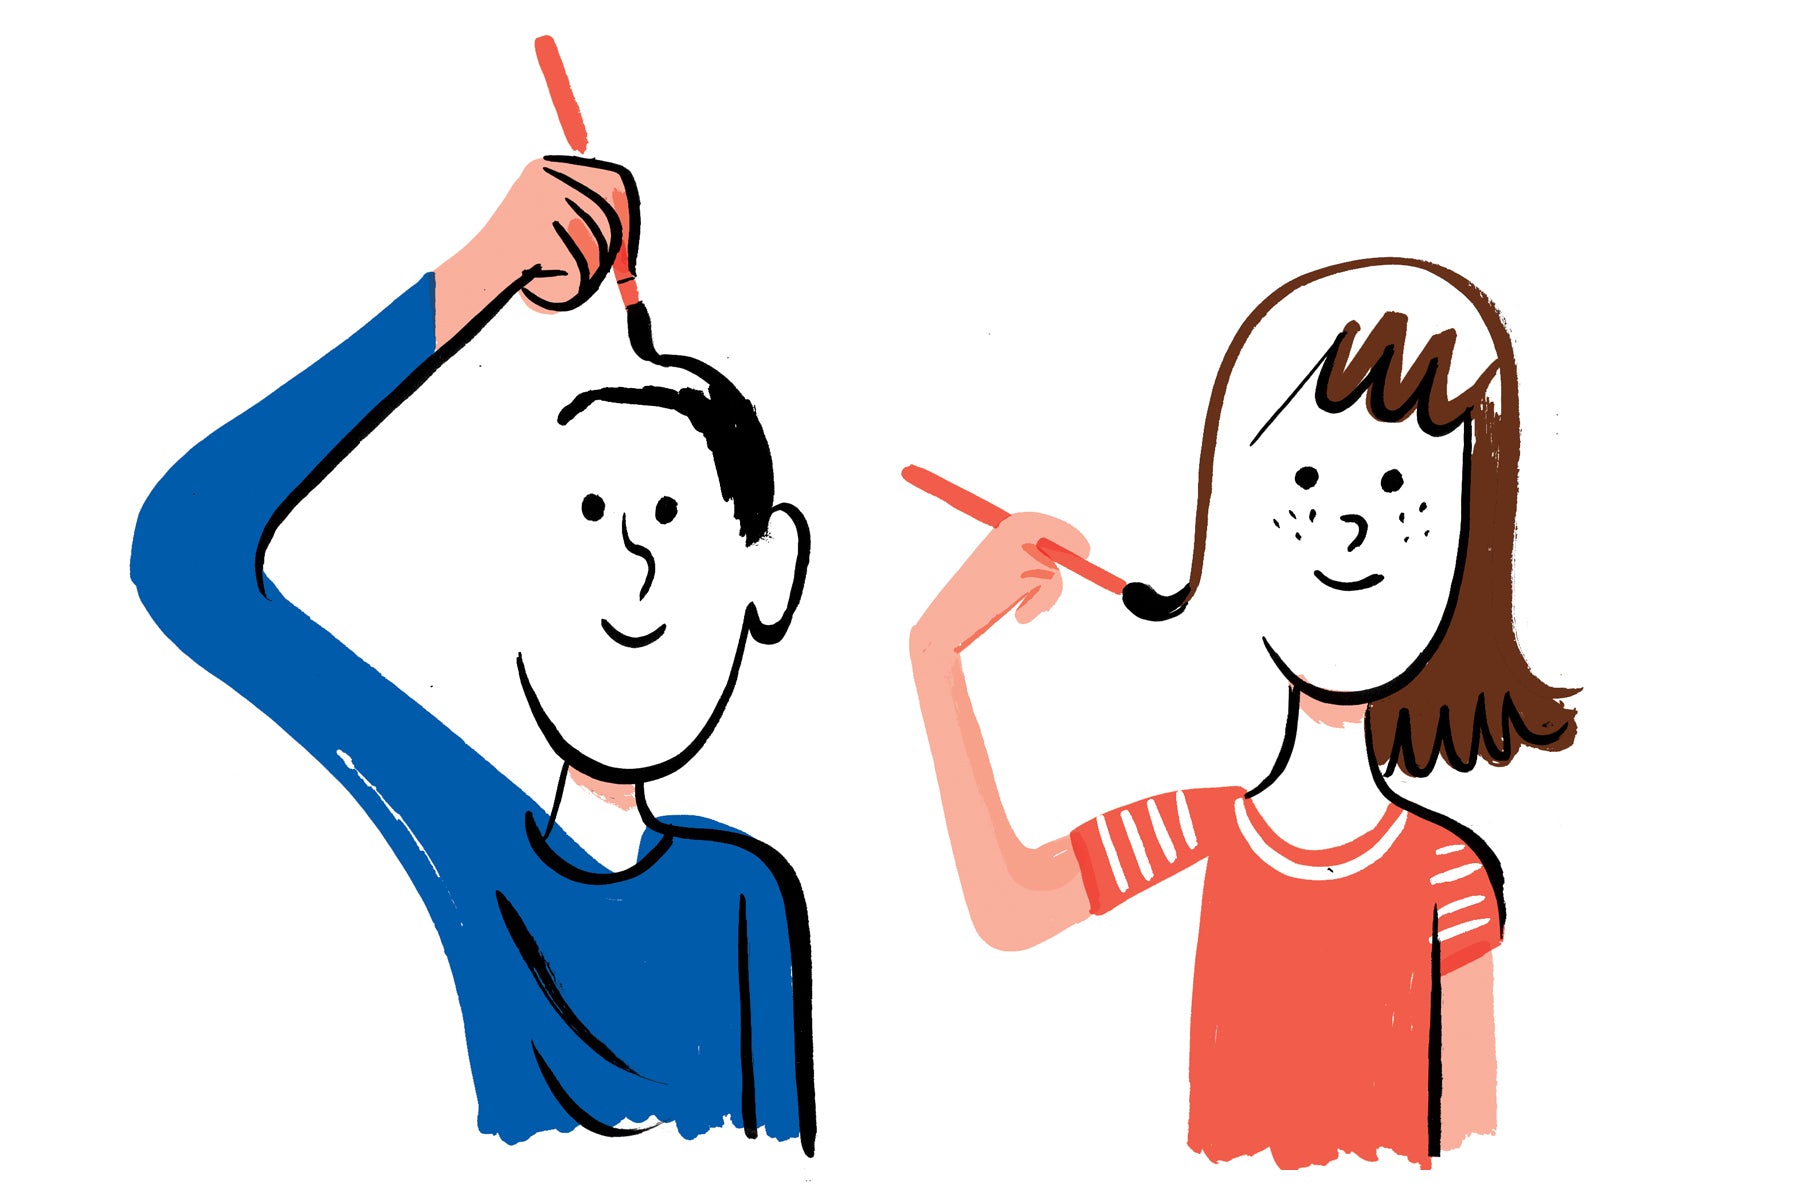 Illustration of a young boy wearing blue and a young girl wearing red, drawing themselves. 